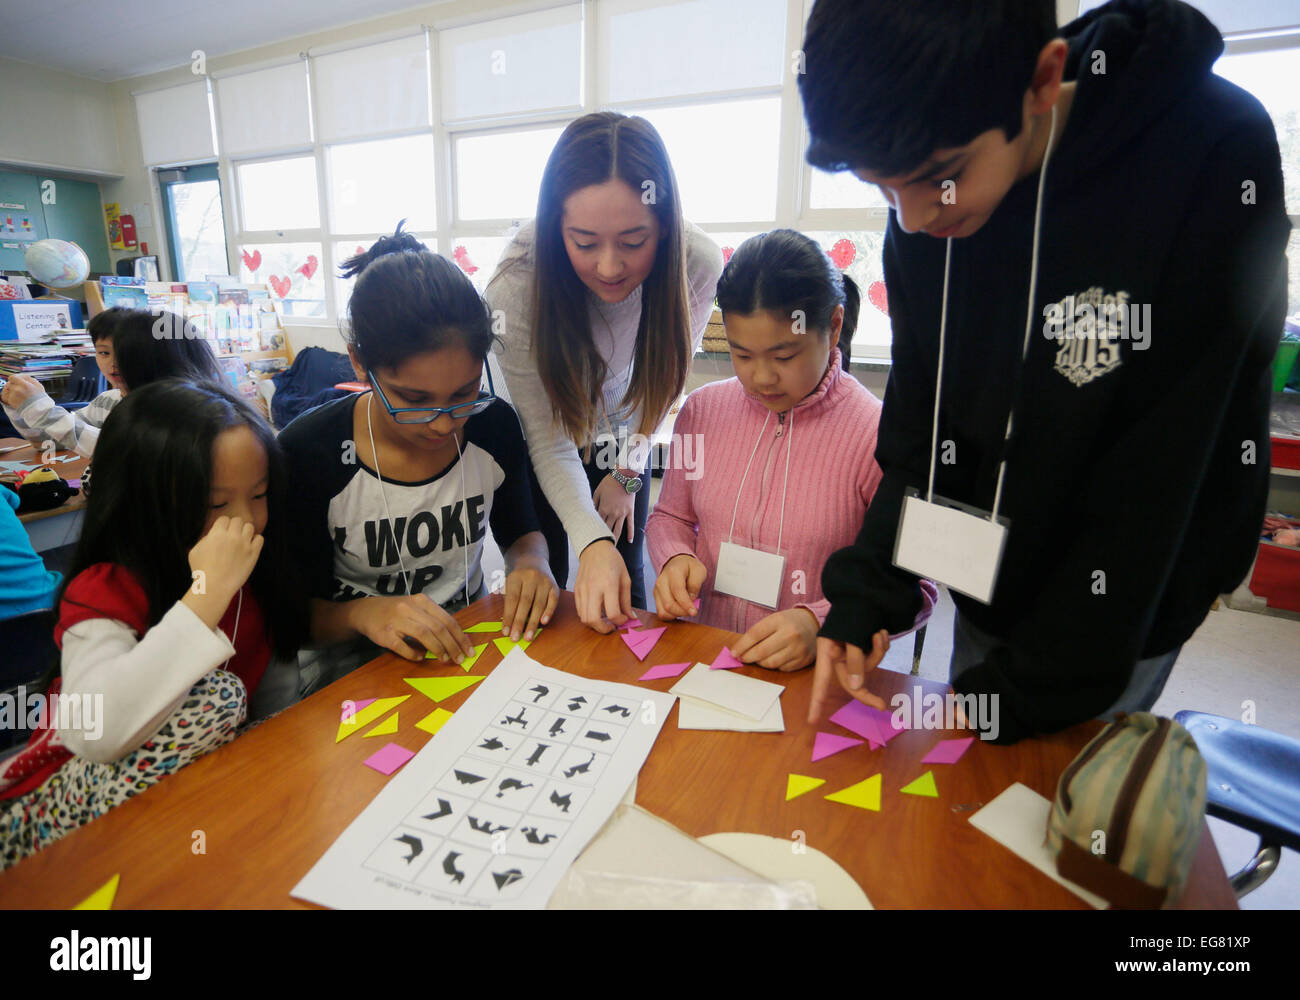 (150219) -- VANCOUVER, Canada, Feb. 19, 2015 (Xinhua) -- Pupils learn how to play tangram at the Whiteside Elementary School in Richmond, Canada, Feb. 18, 2015. Schools in Vancouver area held different events with the theme of Chinese Lunar New Year for children to learn Chinese culture. (Xinhua/Liang Sen) Stock Photo